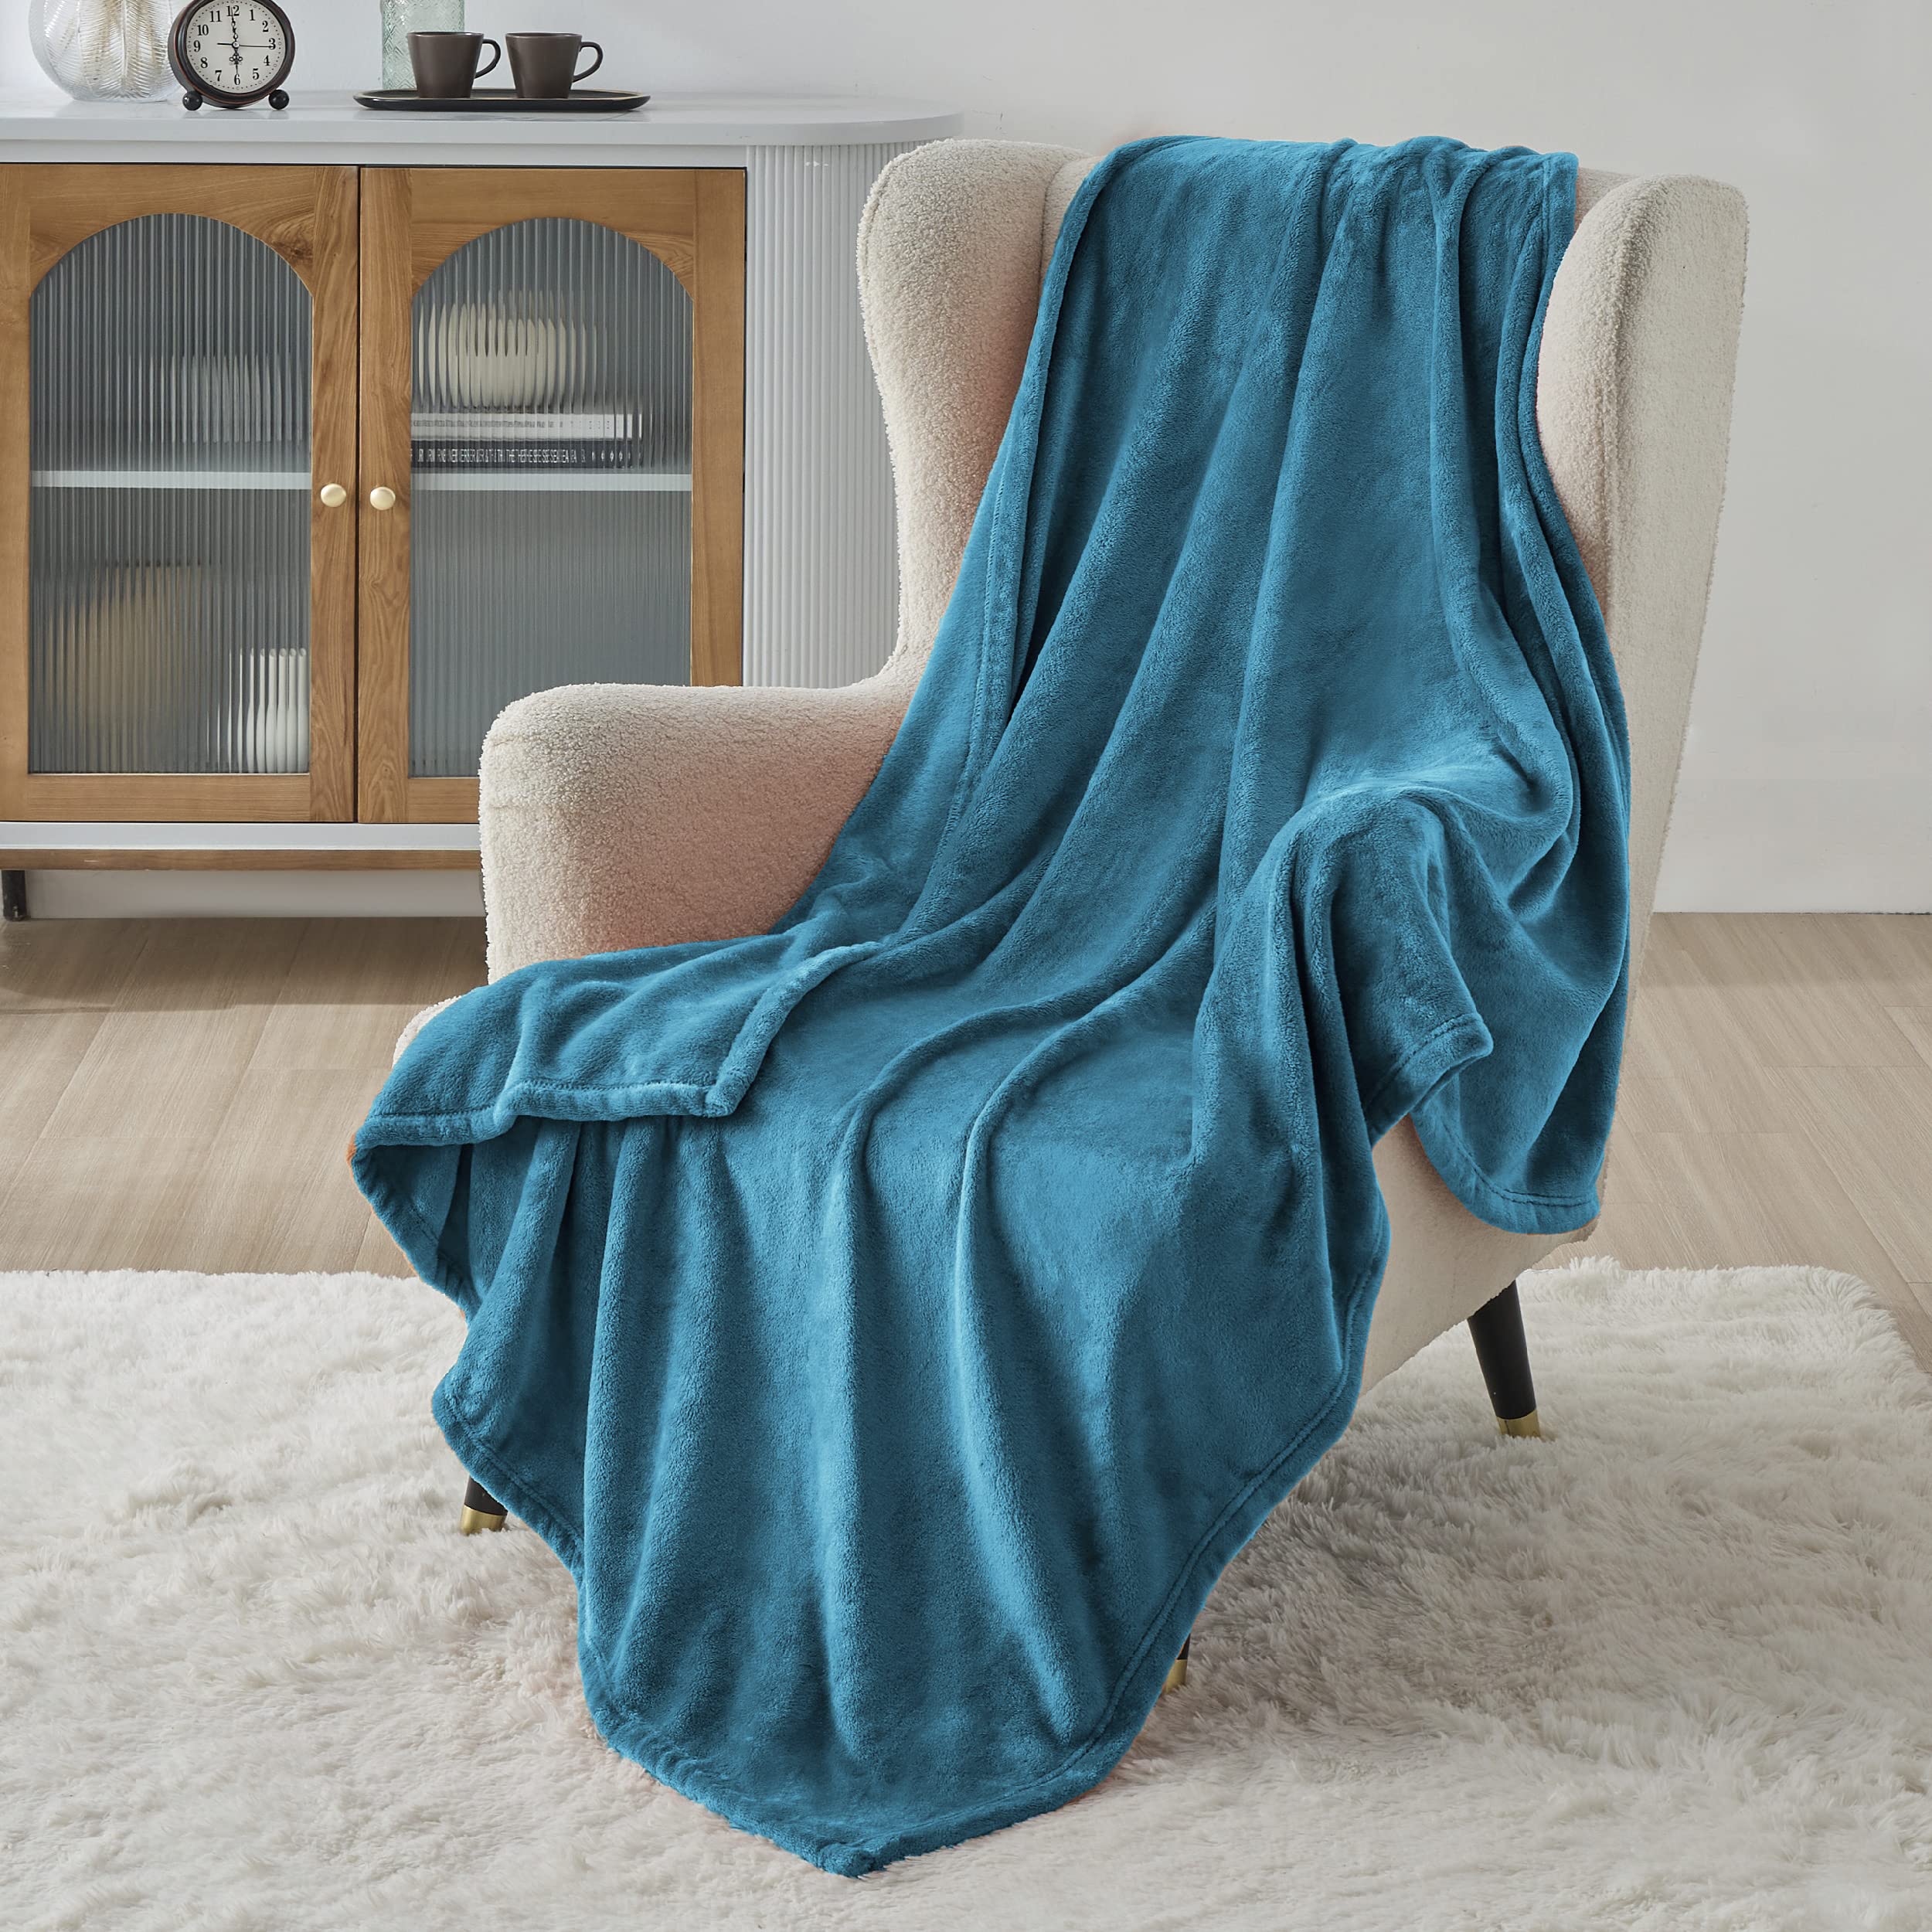 Book Cover Bedsure Fleece Blanket Twin Blanket Teal-300GSM Soft Lightweight Plush Cozy Twin Blankets for Bed,Sofa,Couch,Travel,Camping,60x80 inches Twin (60